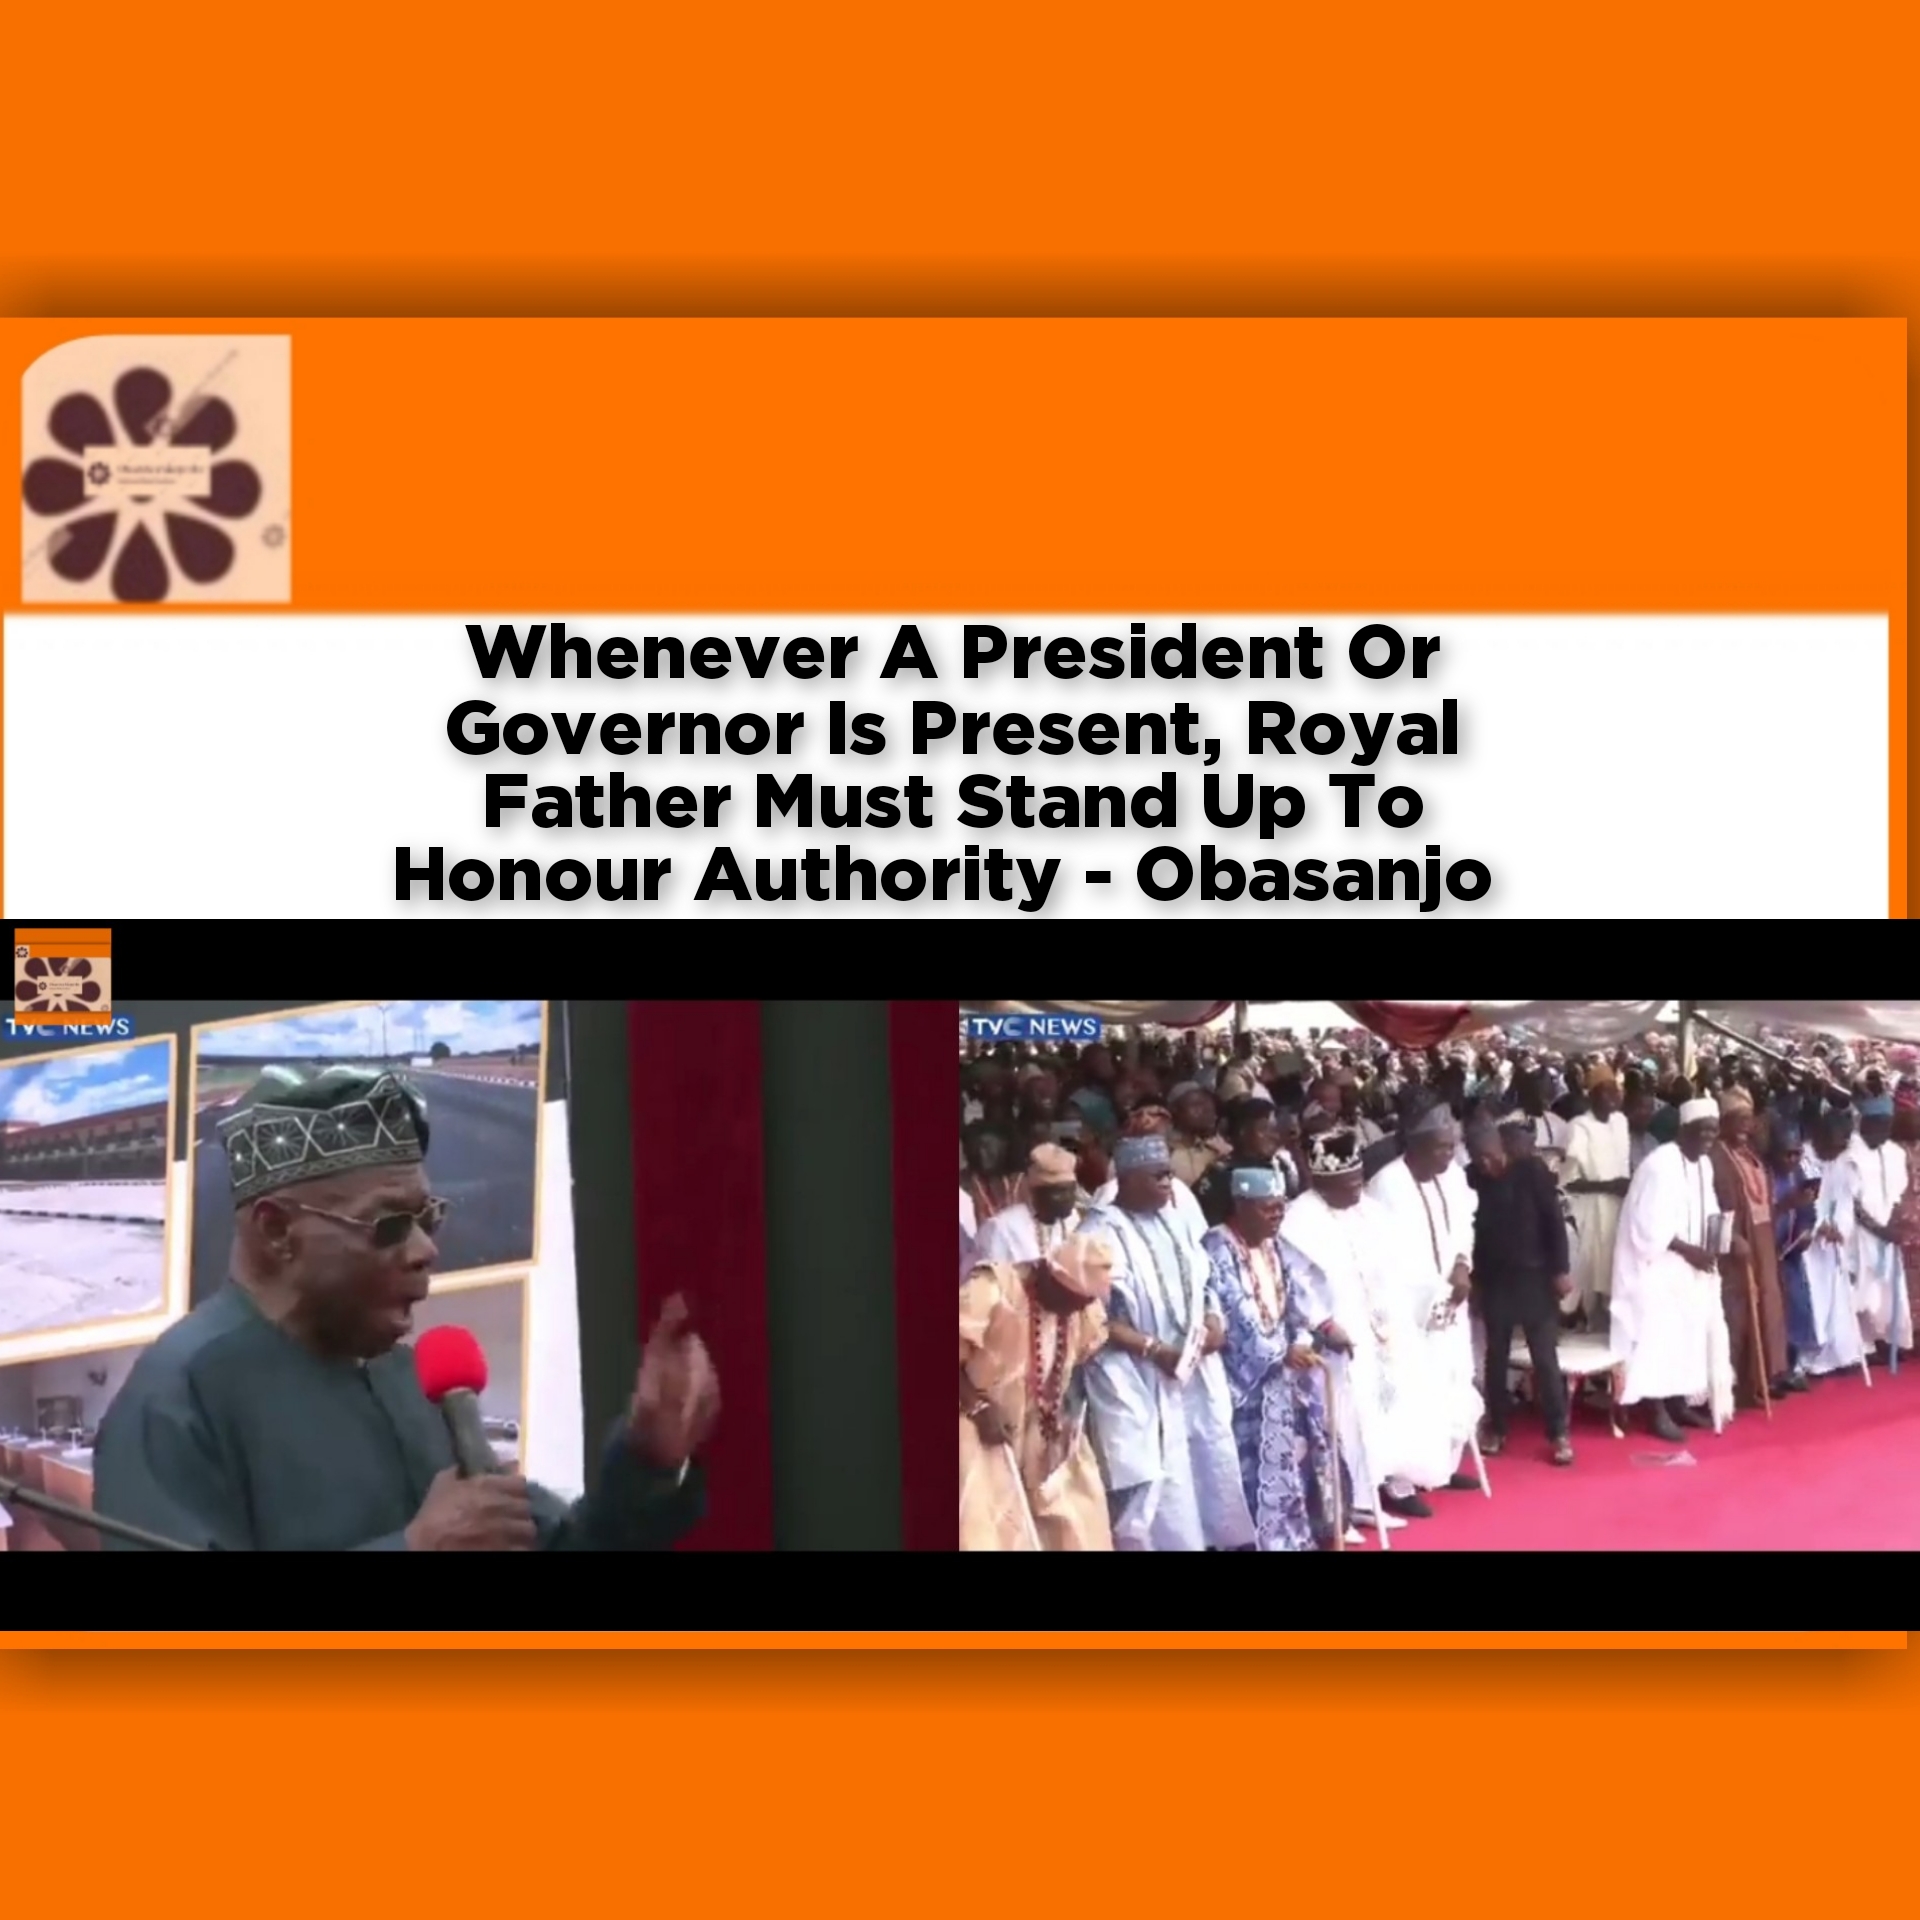 Whenever A President Or Governor Is Present, Royal Father Must Stand Up To Honour Authority - Obasanjo ~ OsazuwaAkonedo #UN